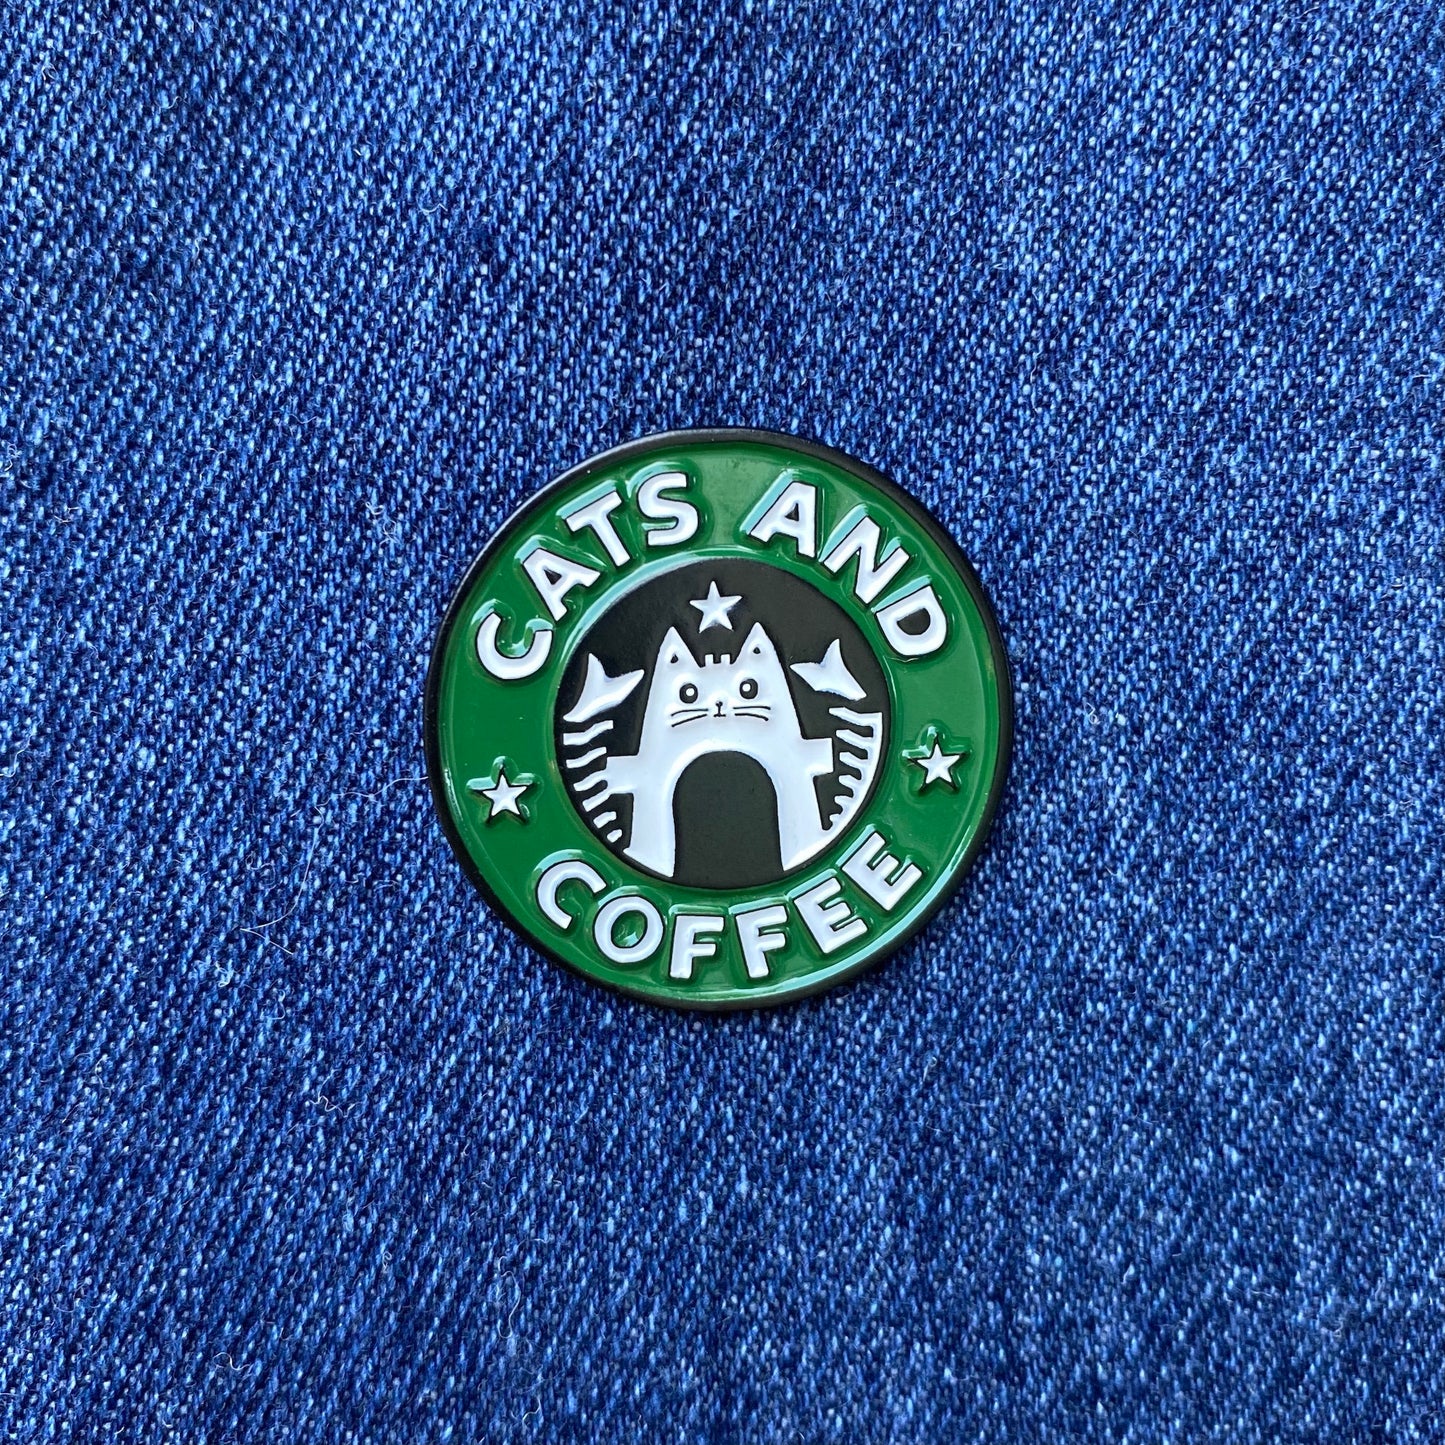 Starcats Cats and Coffee Enamel Pin - thehappypin